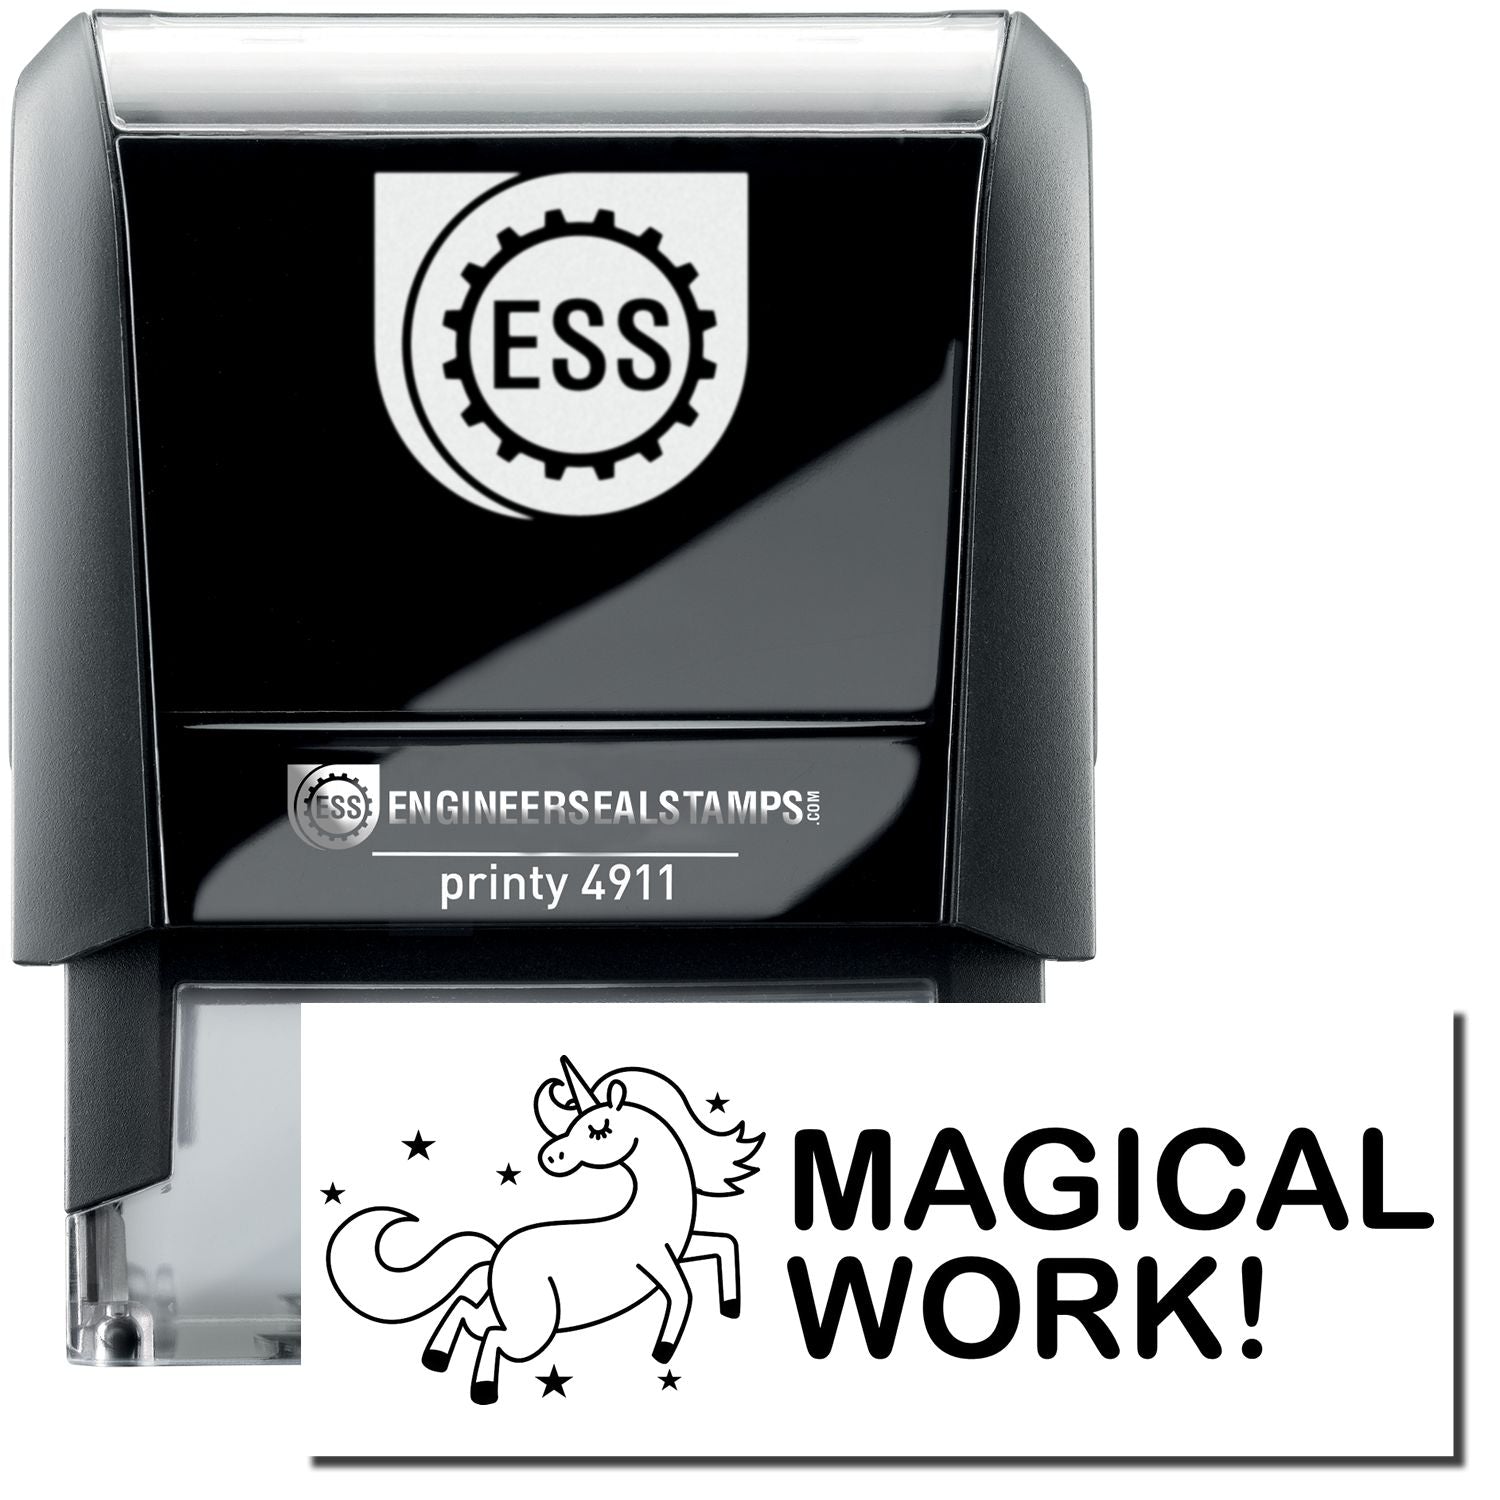 A self-inking stamp with a stamped image showing how the text "MAGICAL WORK!" with an image of a unicorn dancing among the stars on the left side is displayed after stamping.